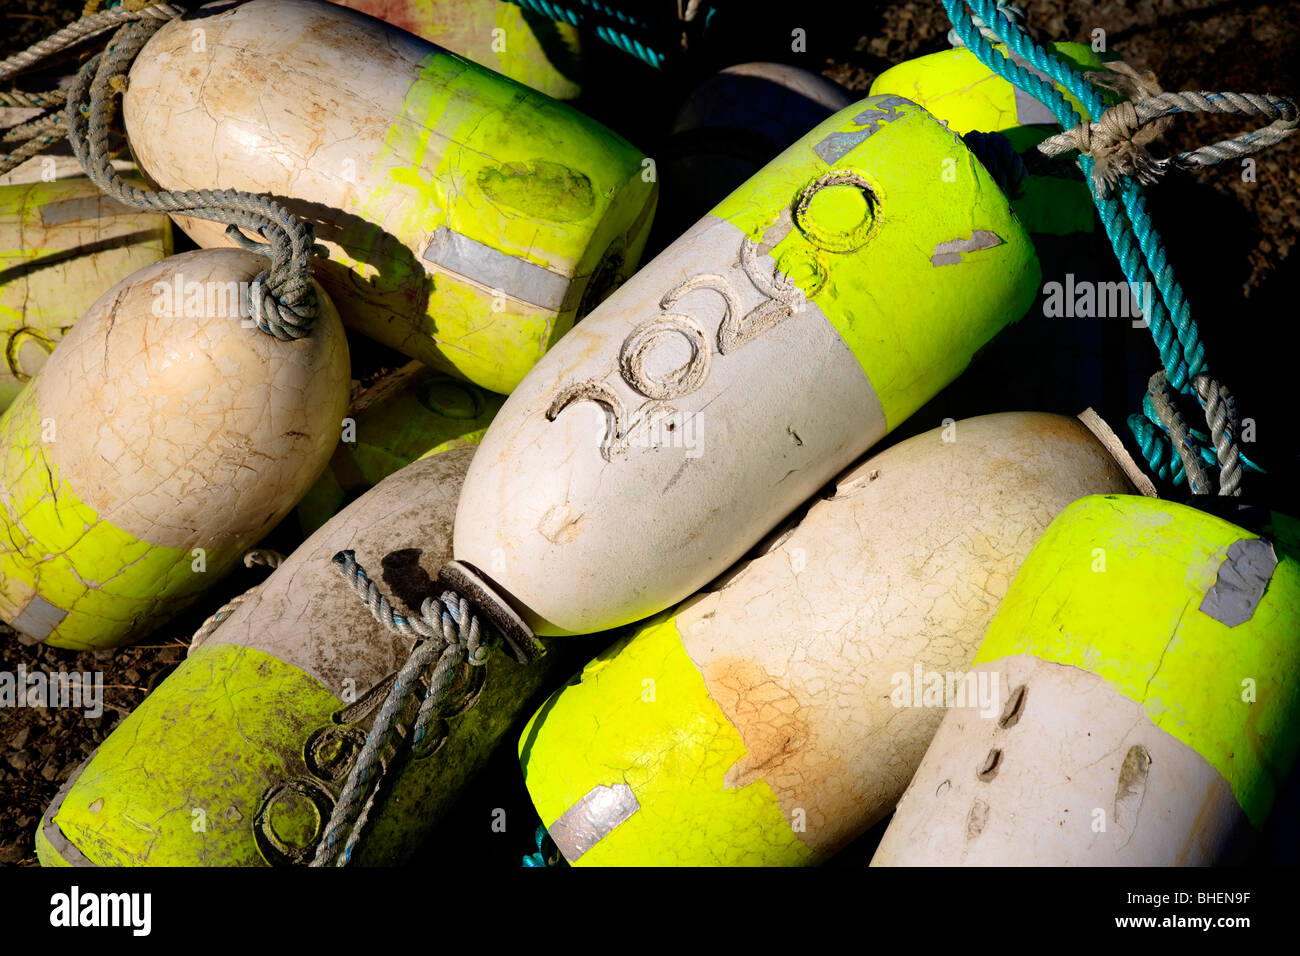 A pile of commercial fishing floats Stock Photo